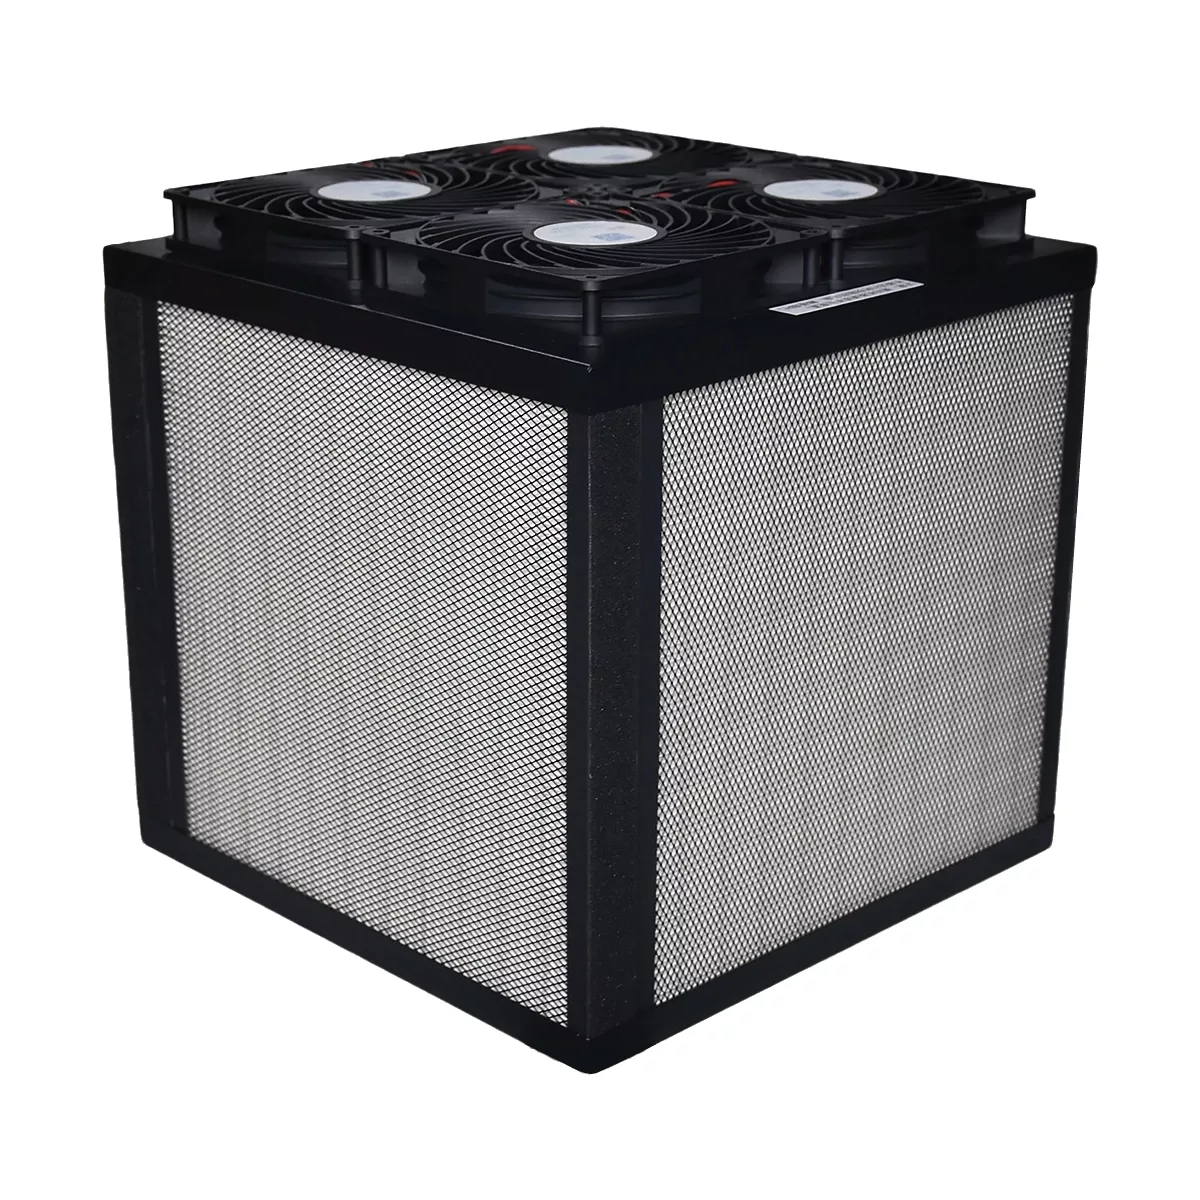 CR-Box Air purifier with automatic speed control